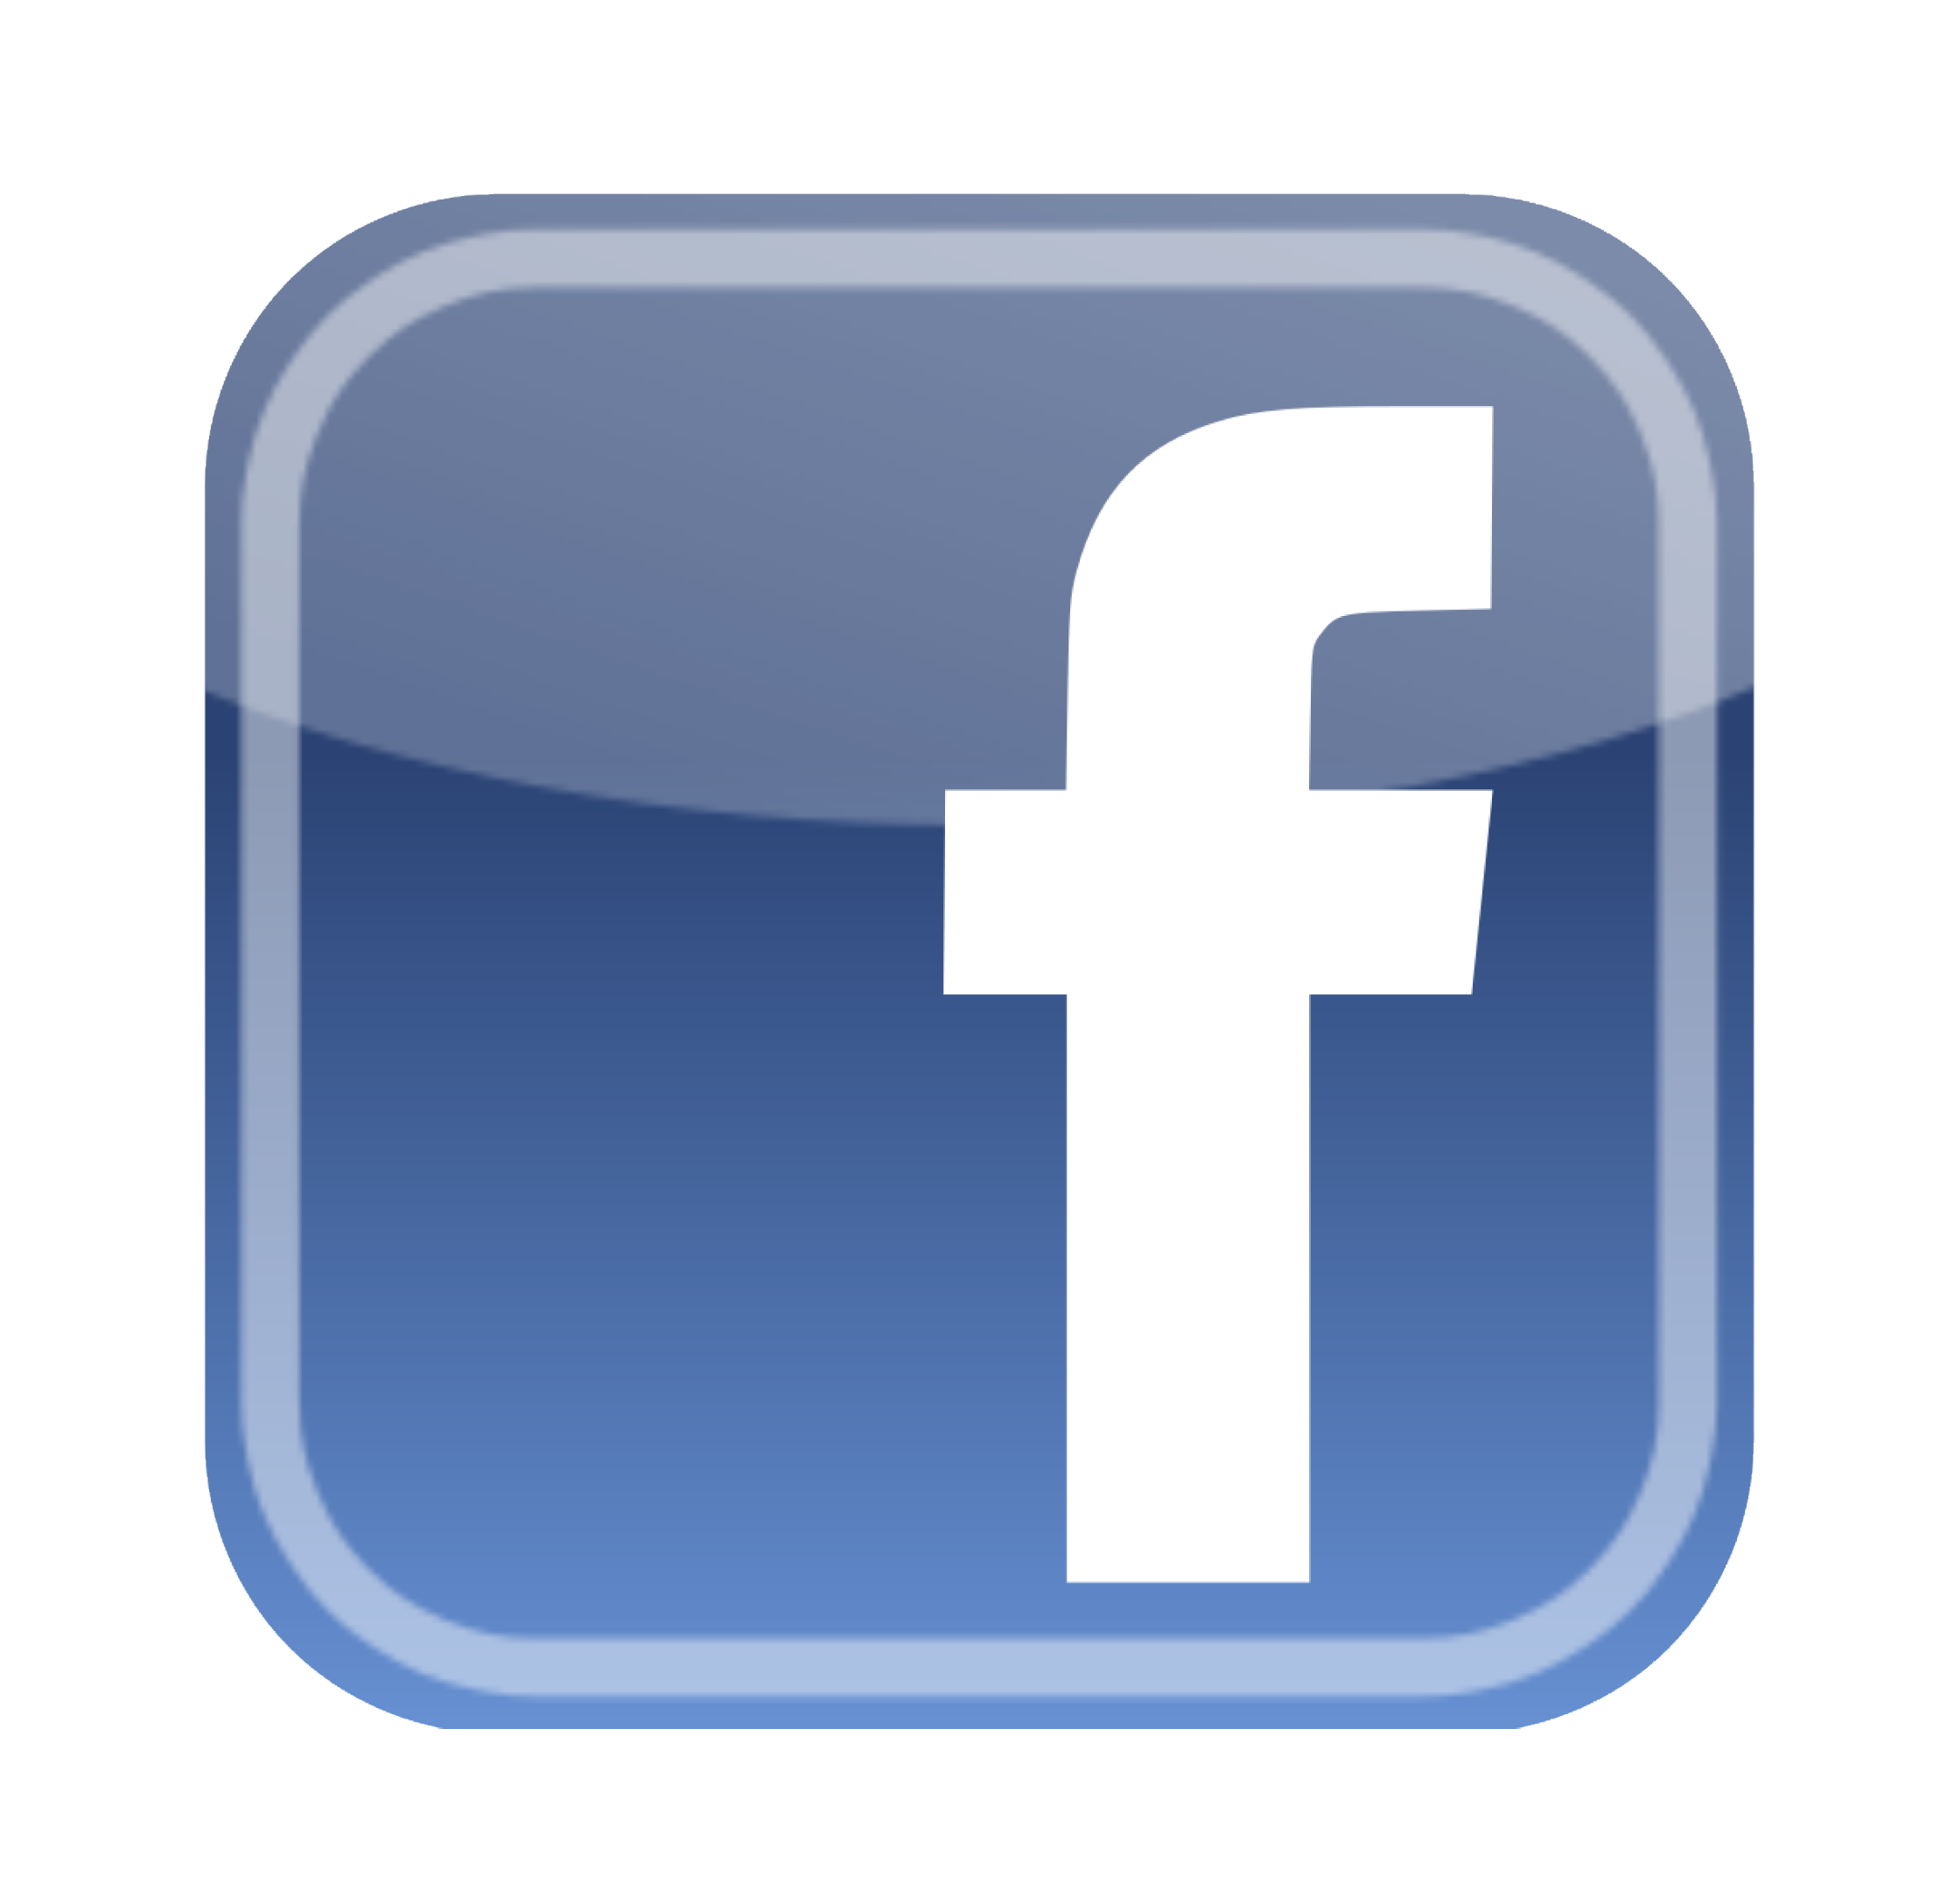 Like Icons Button Computer Messenger Logo Facebook PNG Image